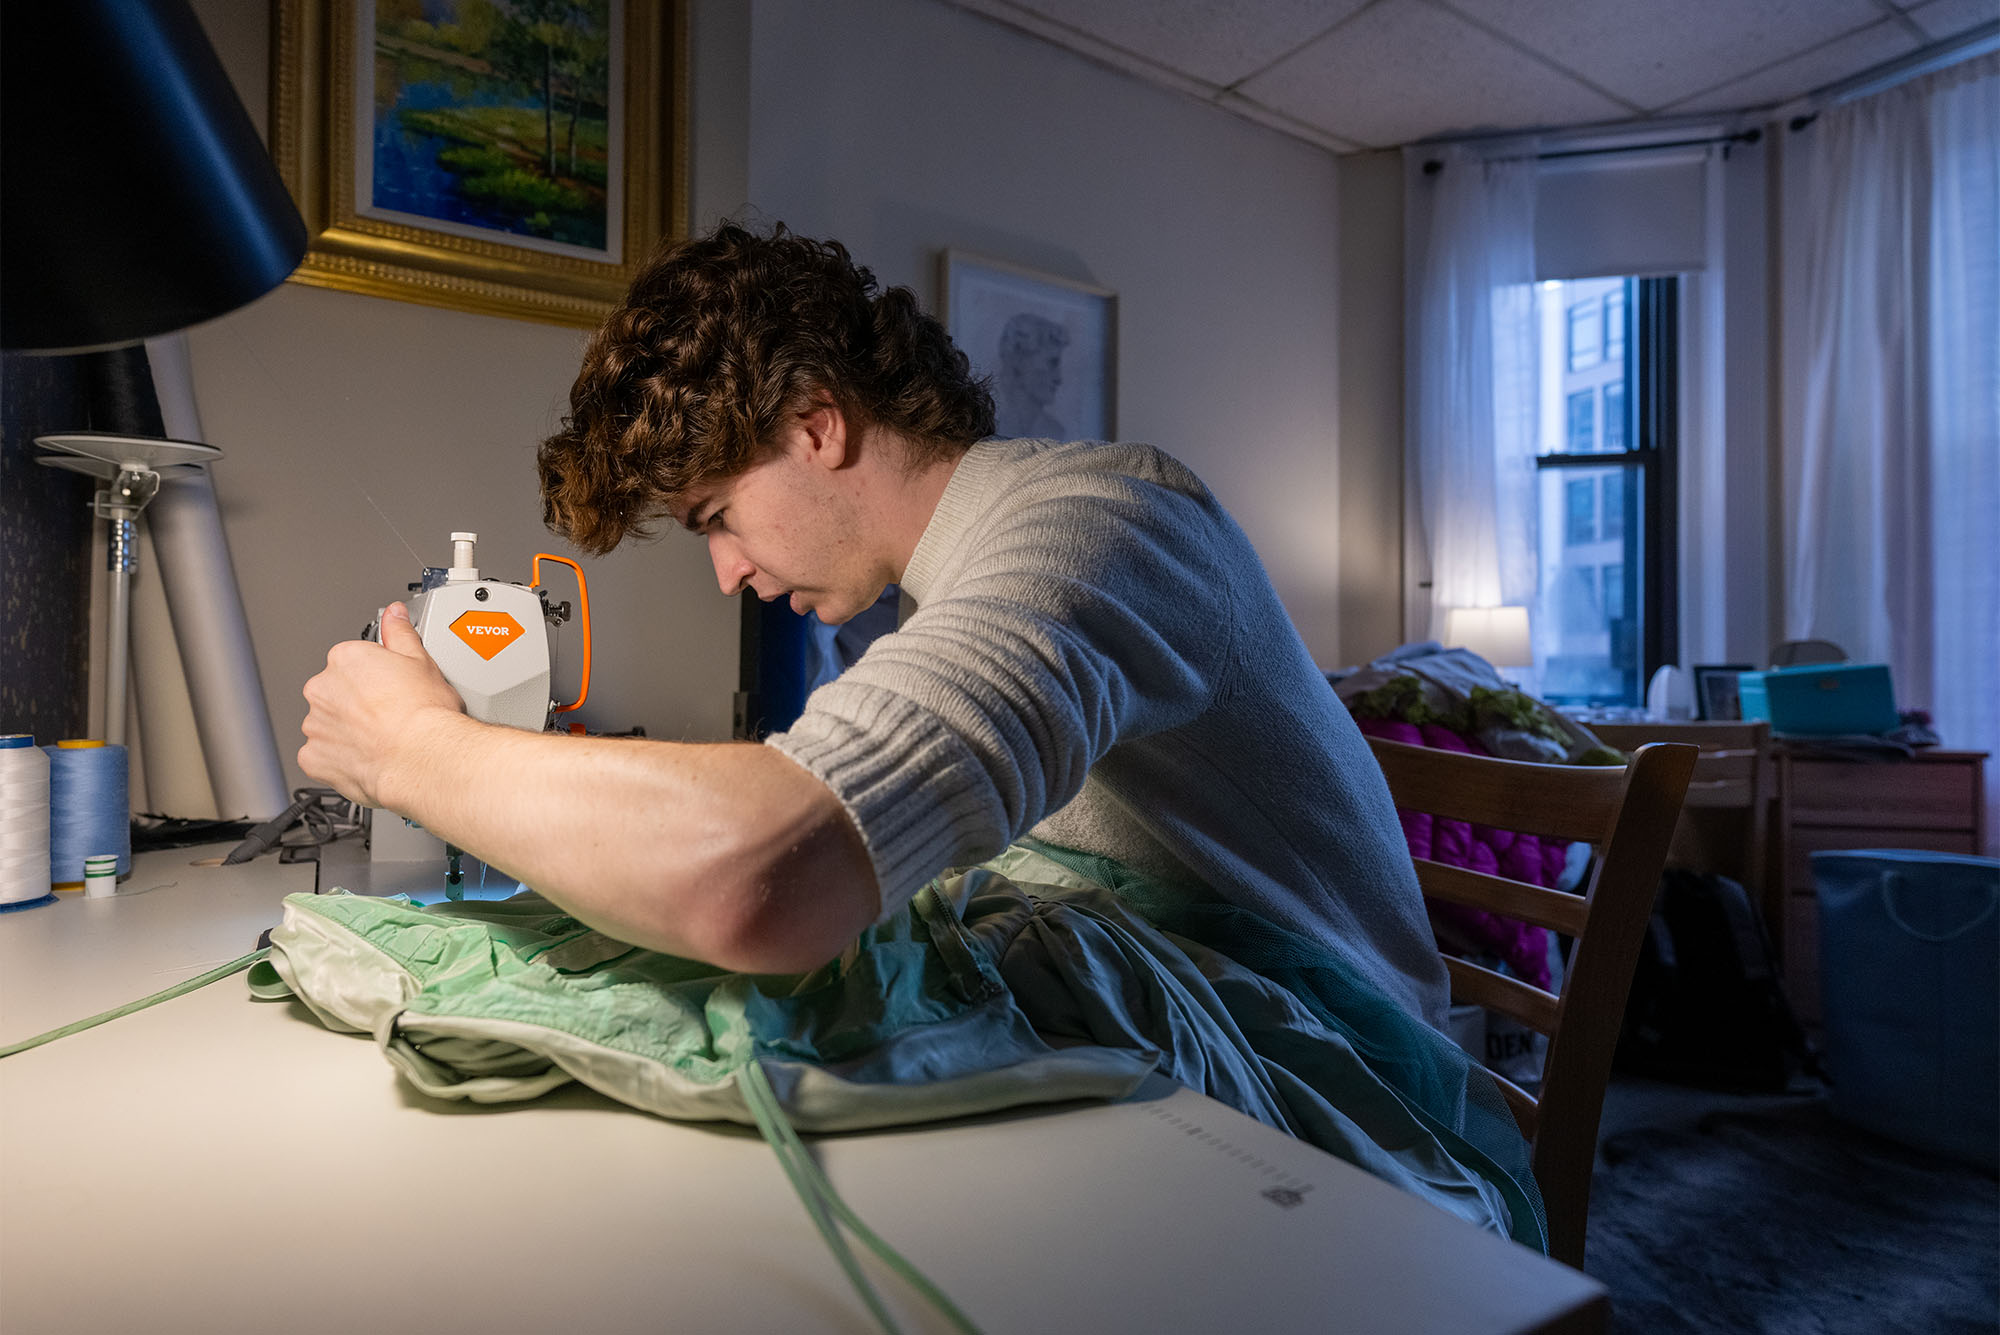 Photo: Hutton brings his works in progress and sewing materials to campus at the start of each school year and transports them home in the summer. Photo by Cydney Scott